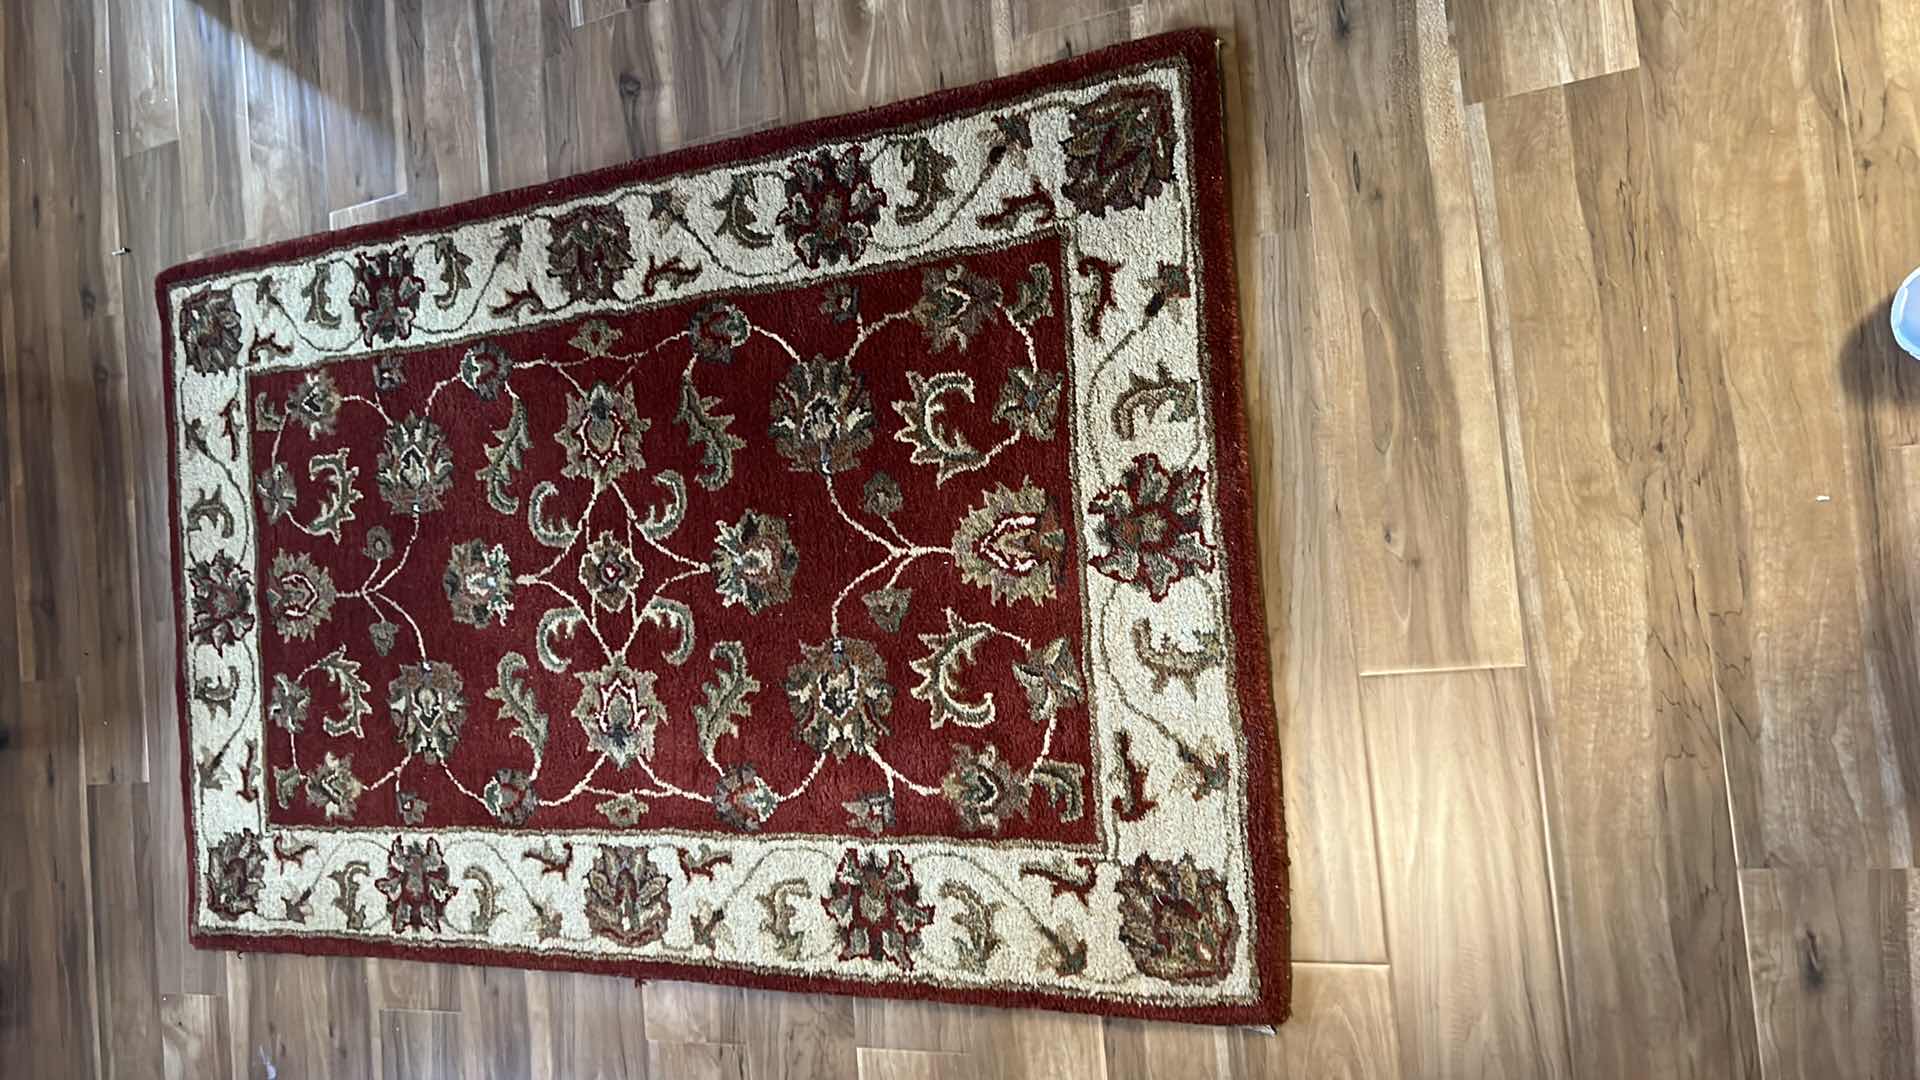 Photo 2 of KENNETH MINK BURGUNDY AND TAN FLORAL WOOL RUG 3’x5’